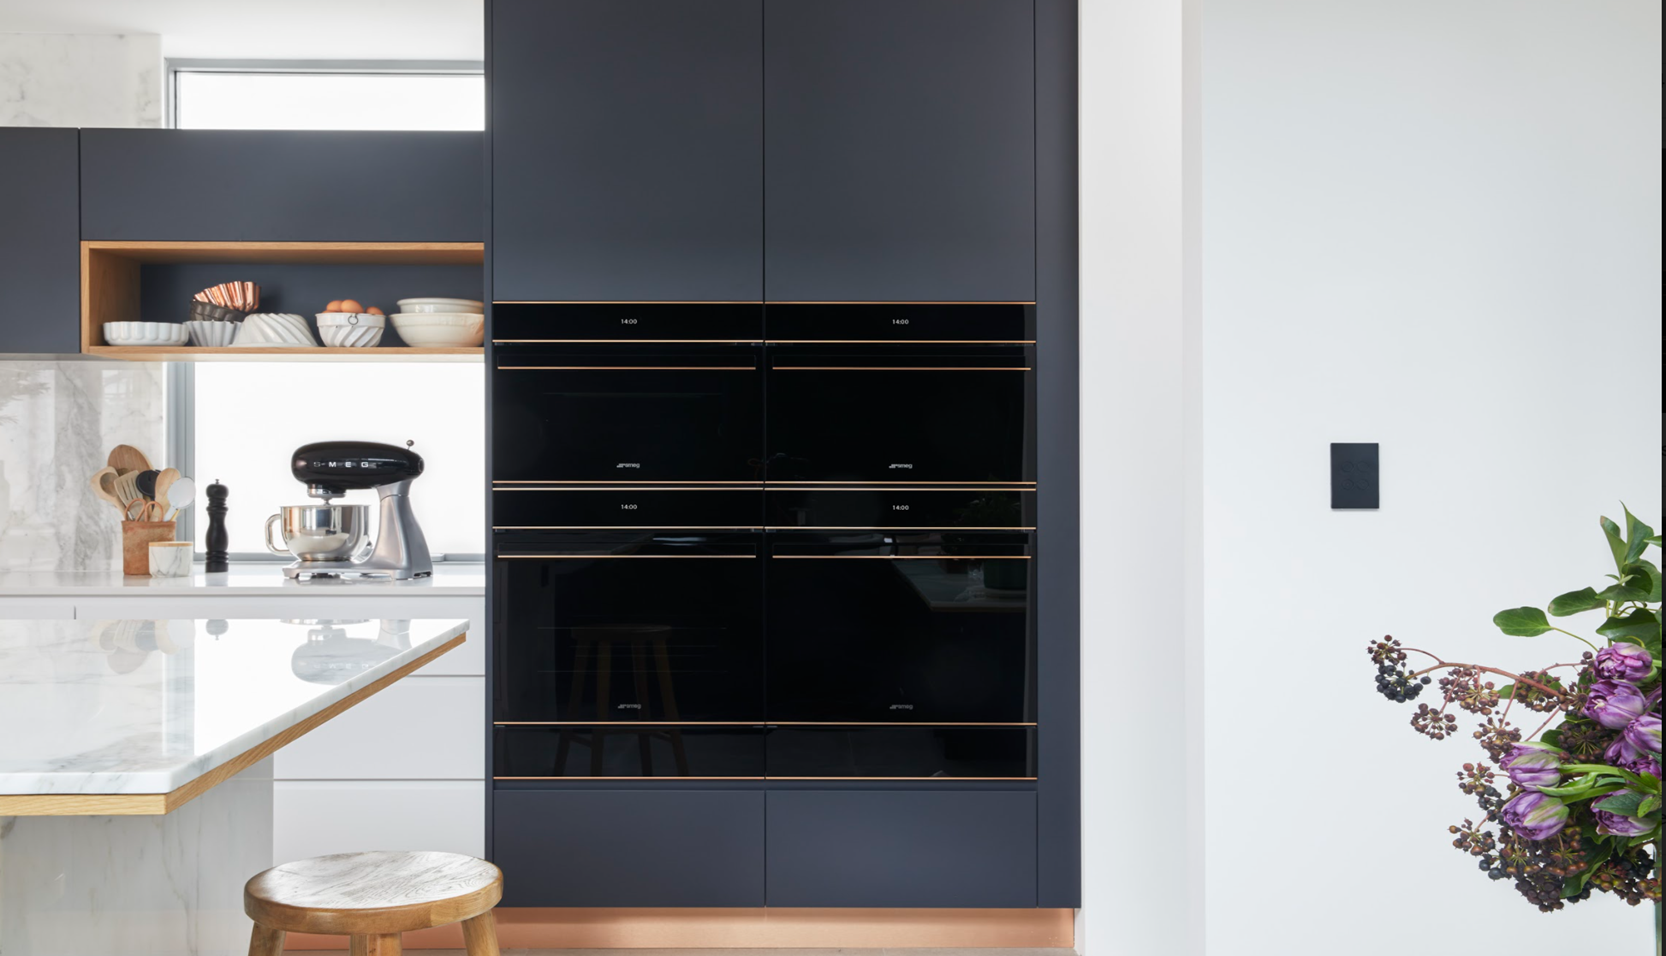 Save Up To 20%* On Selected Smeg Appliances at Hart & Co